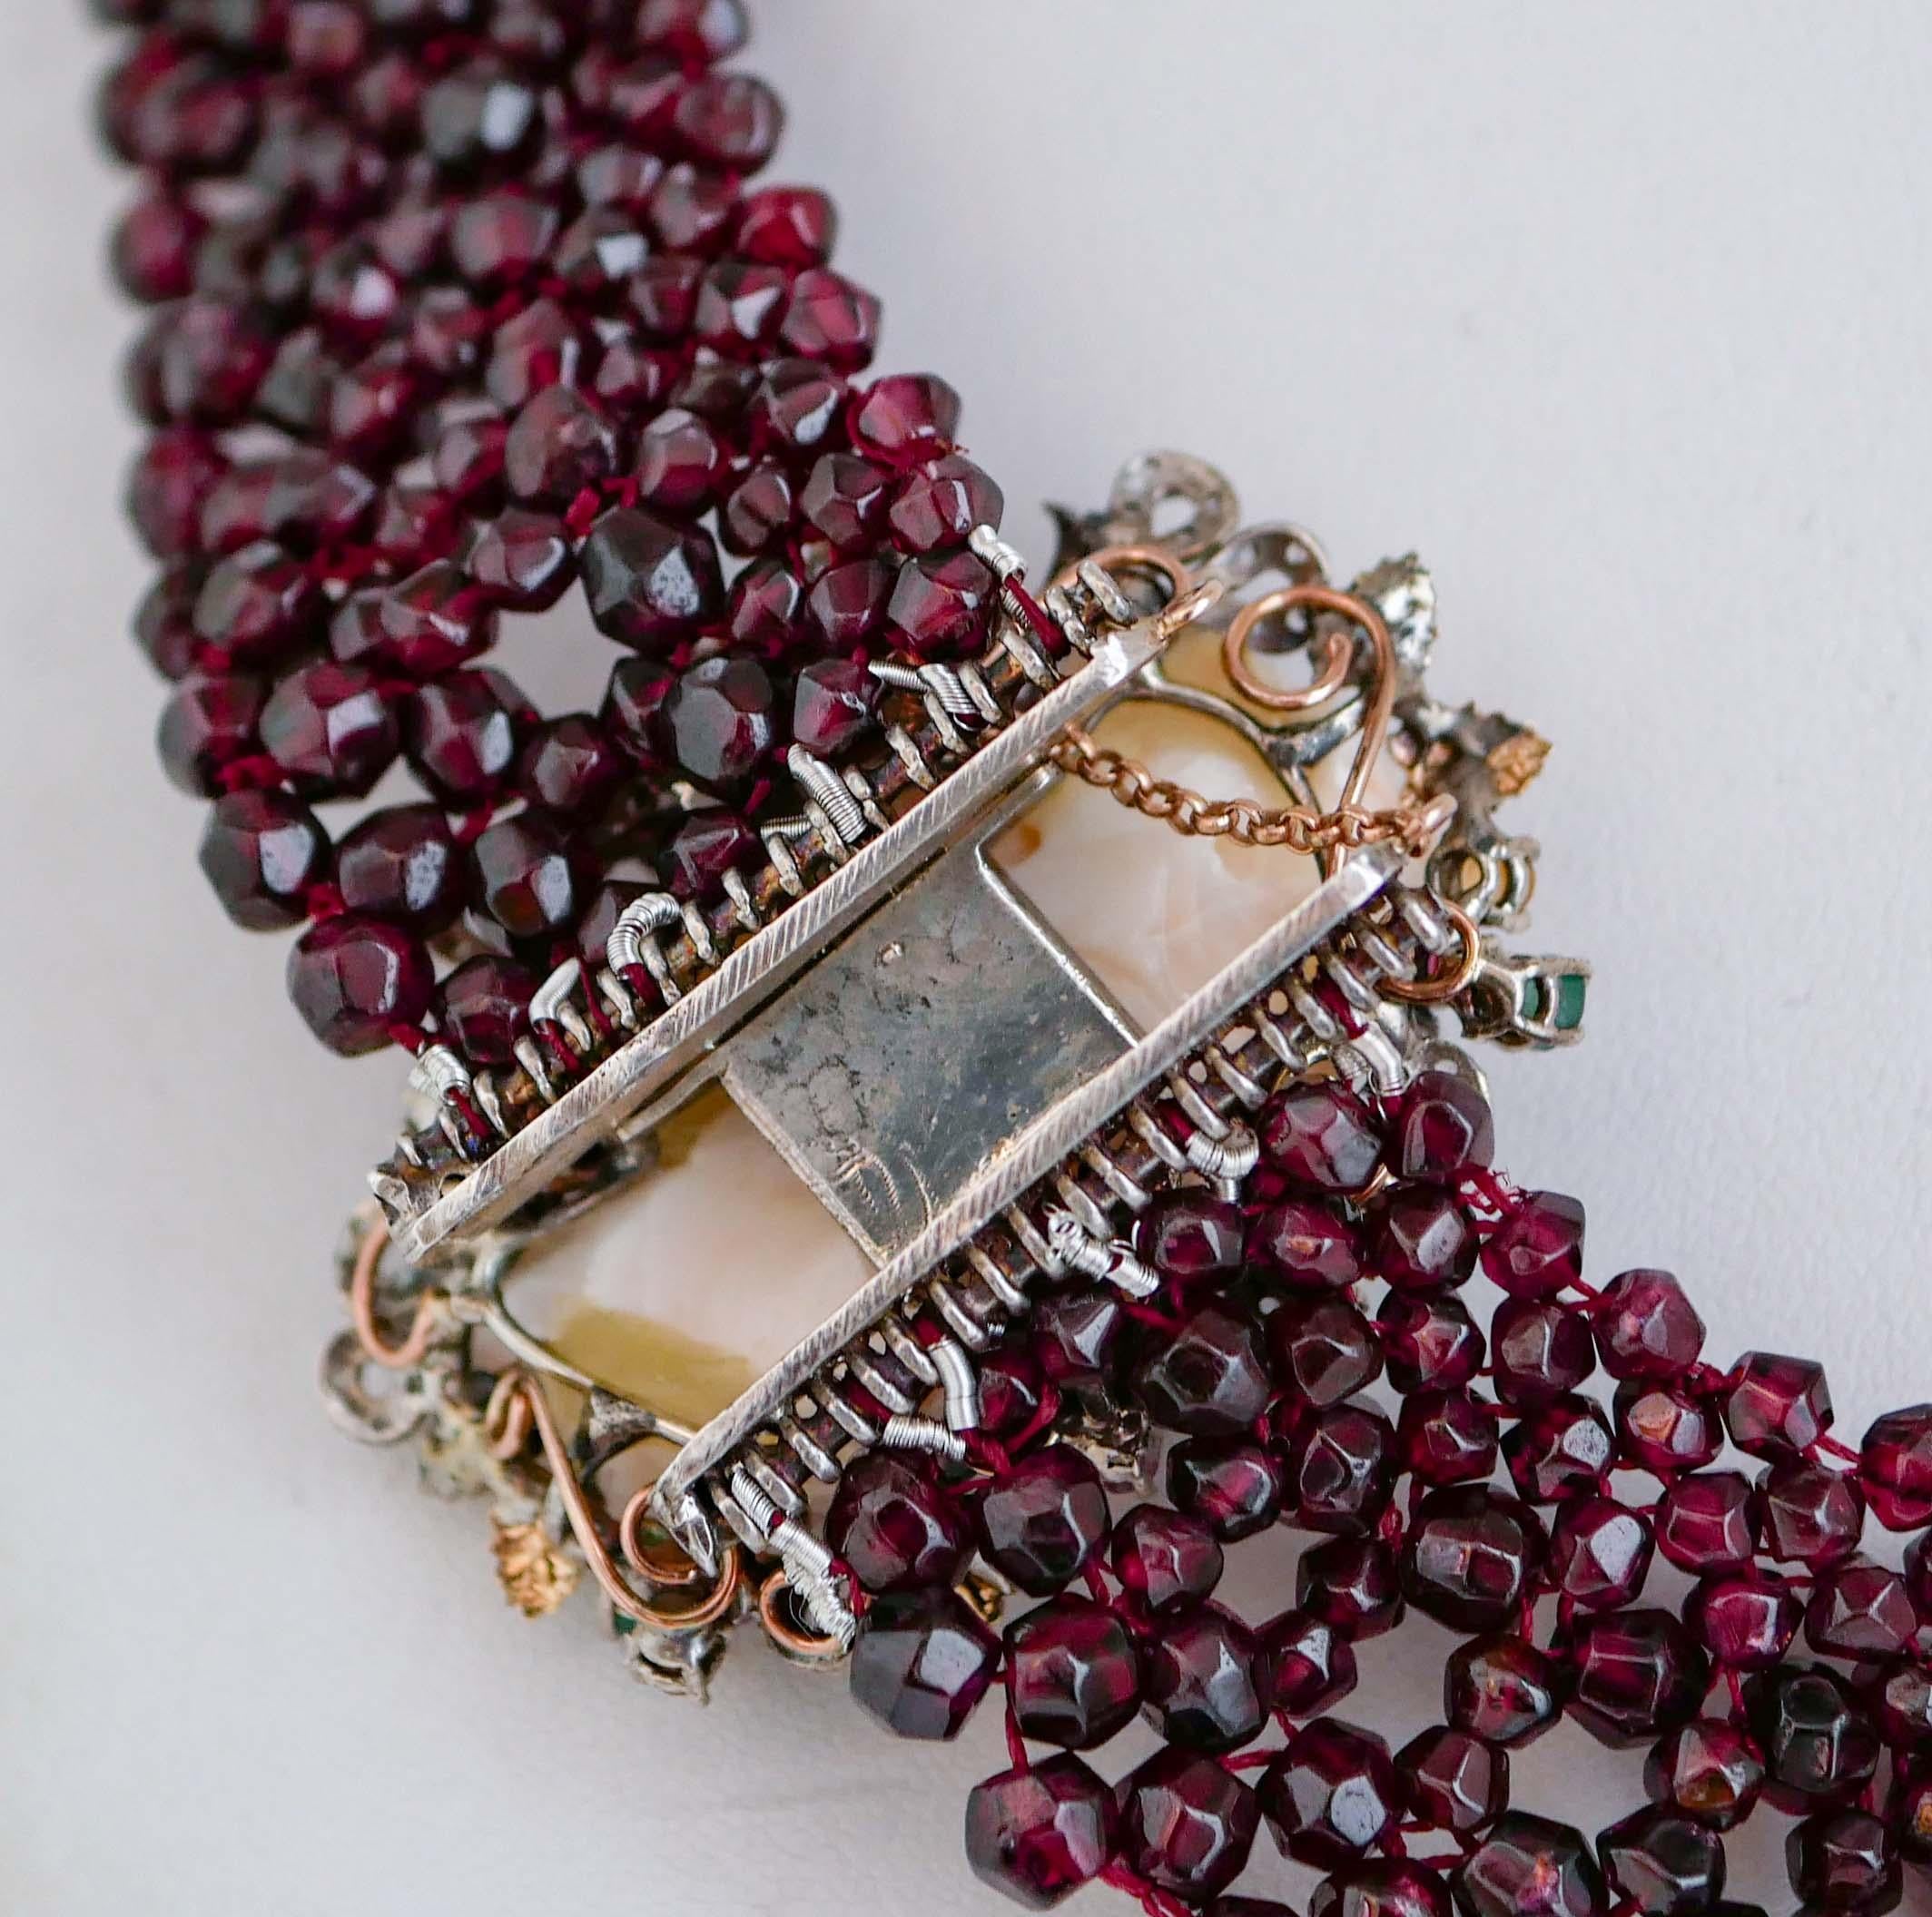 Mixed Cut Coral, Garnets, Diamonds, Emeralds, Rubies, Sapphires, Gold and Silver Necklace